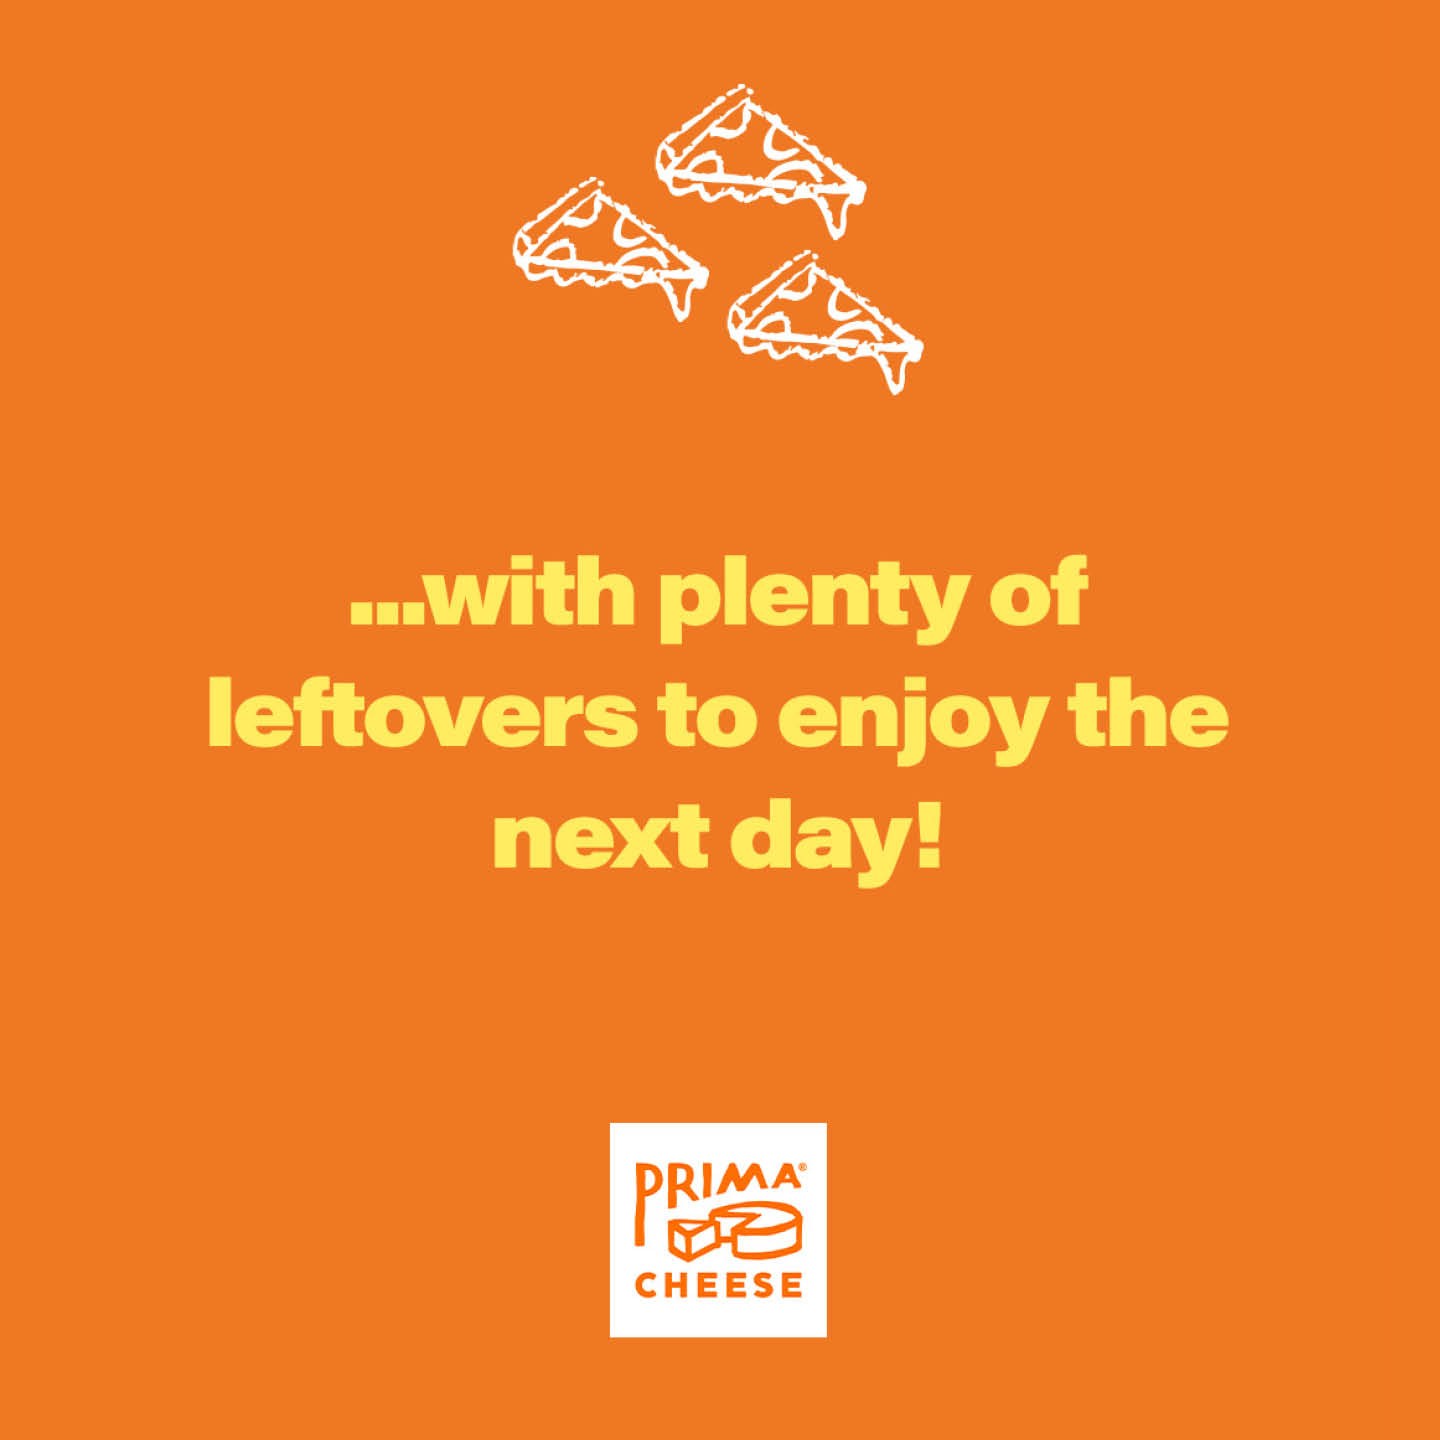 Yellow text against an orange background. The text says: With leftovers to enjoy the next day! Three white hand drawn pizza slices sit above the text.